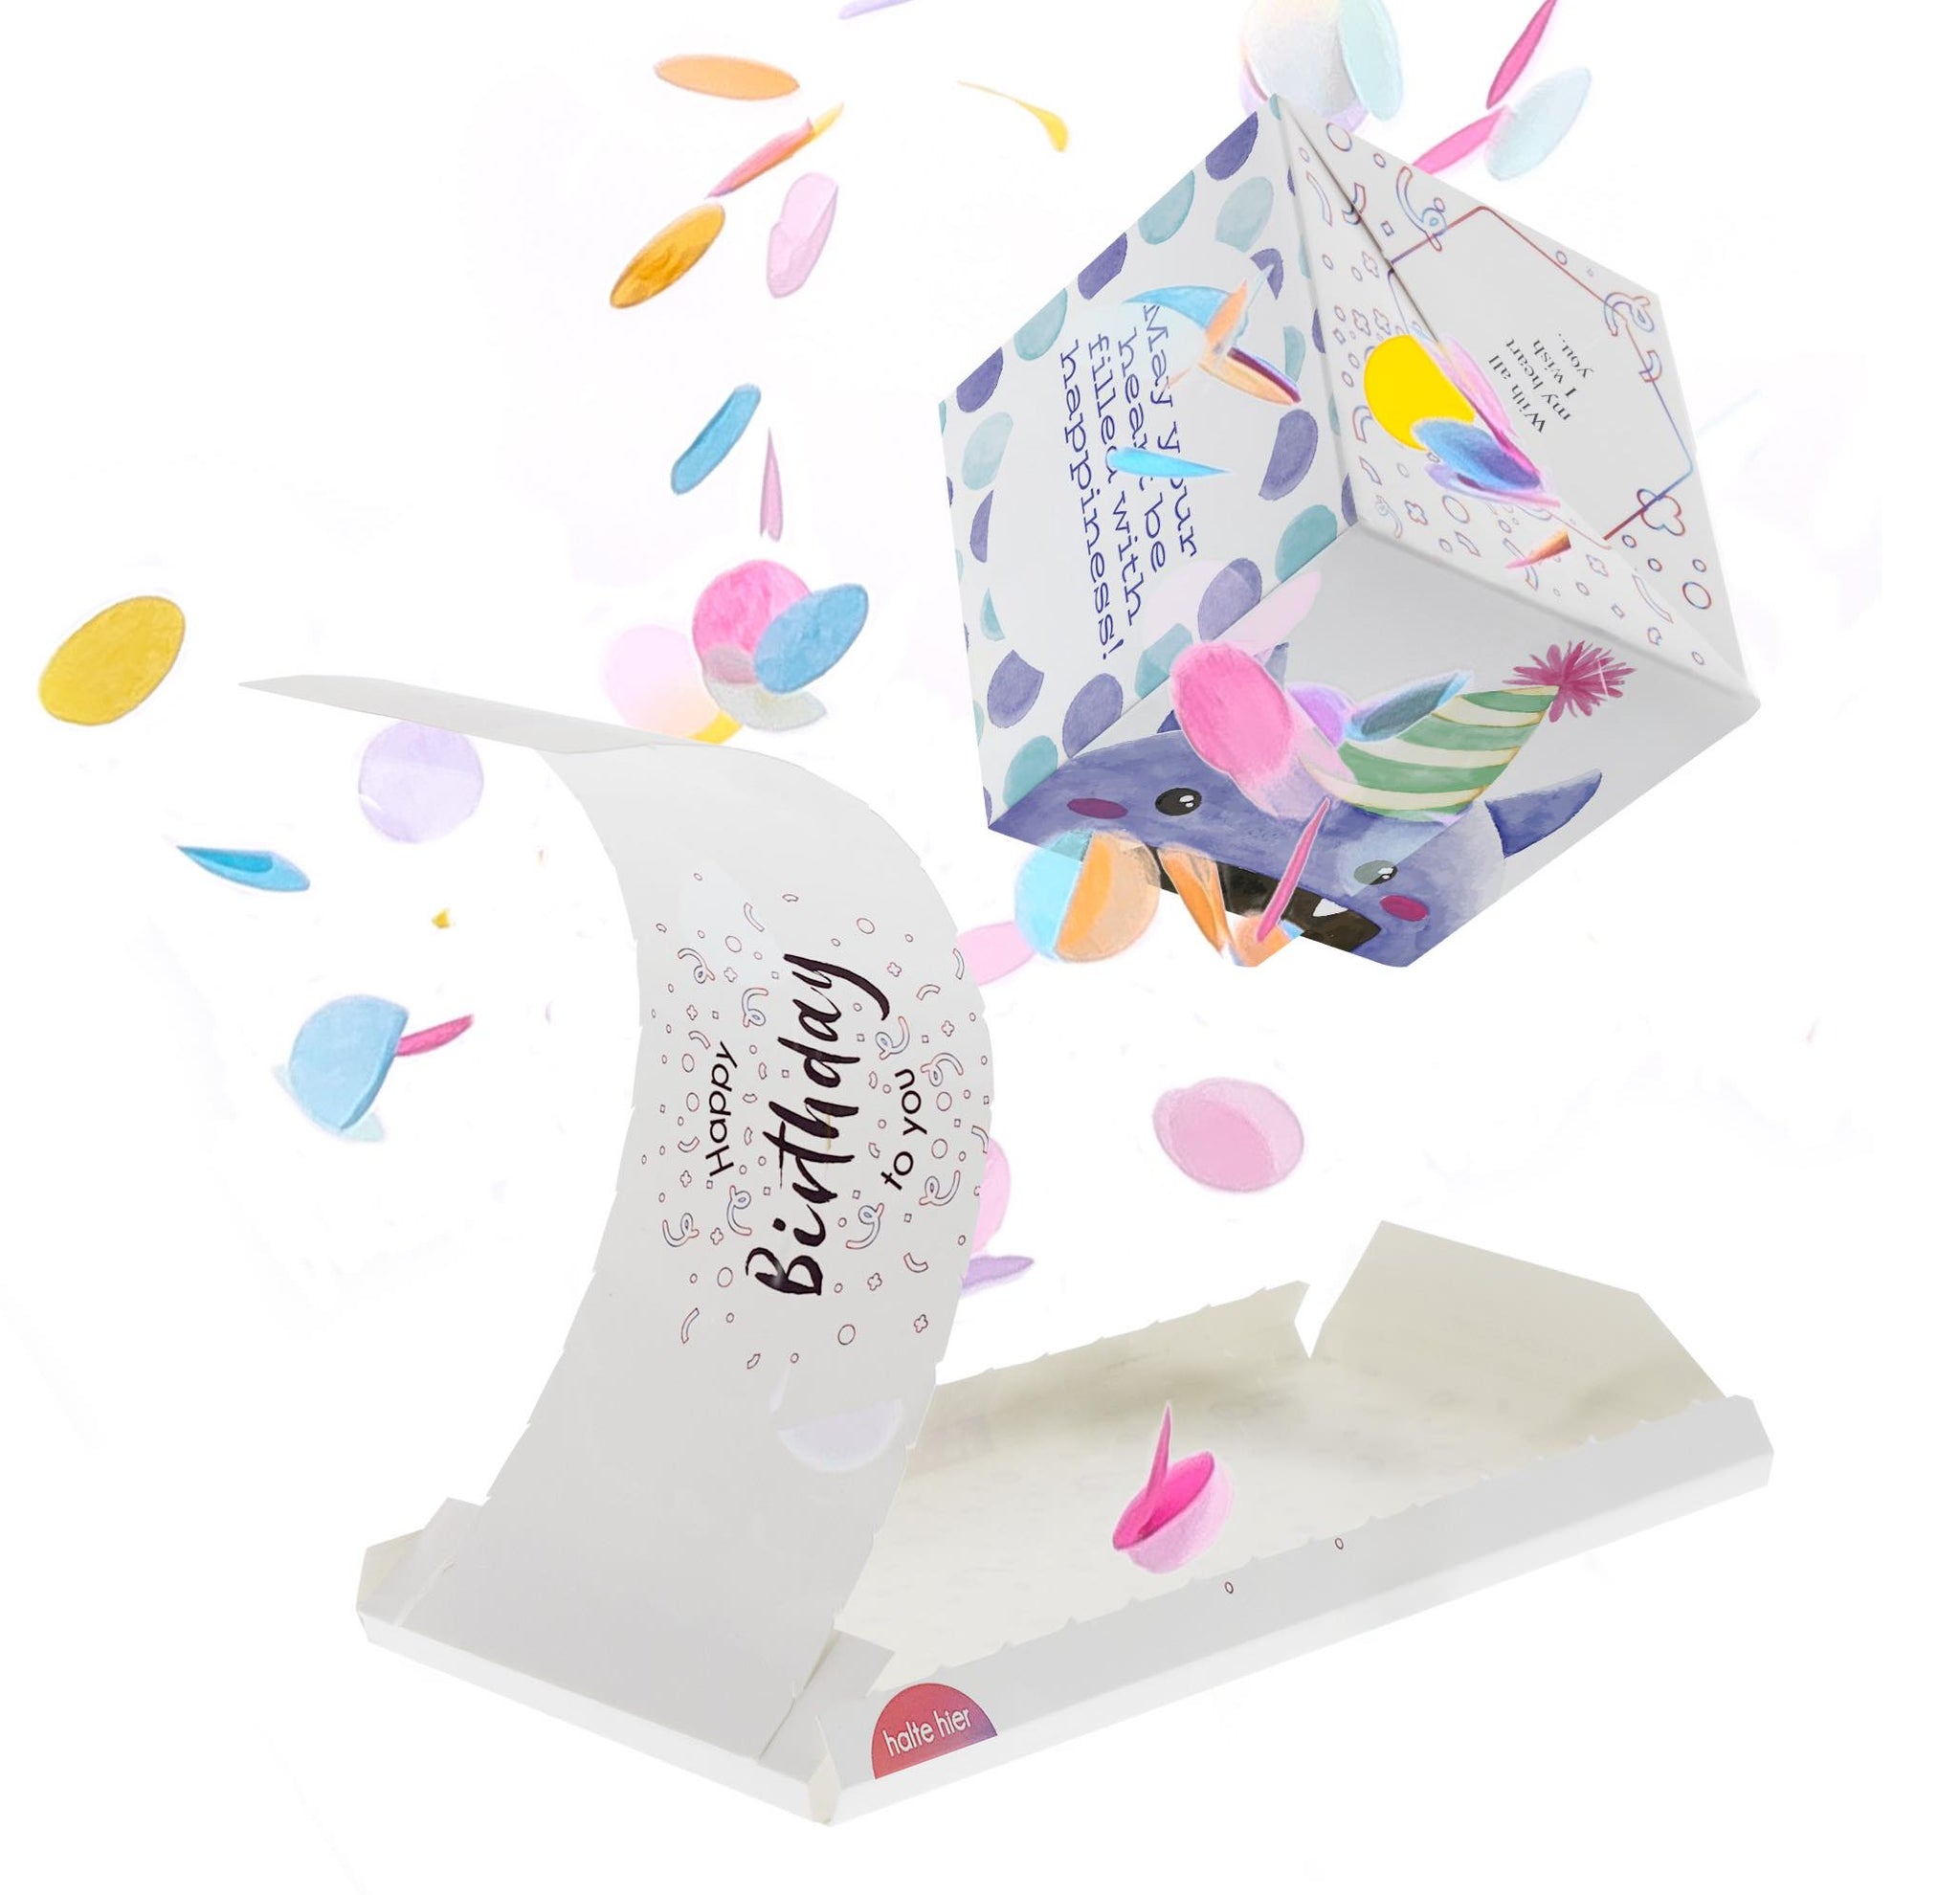 exploding 3D pop up greeting card for birthday with confetti